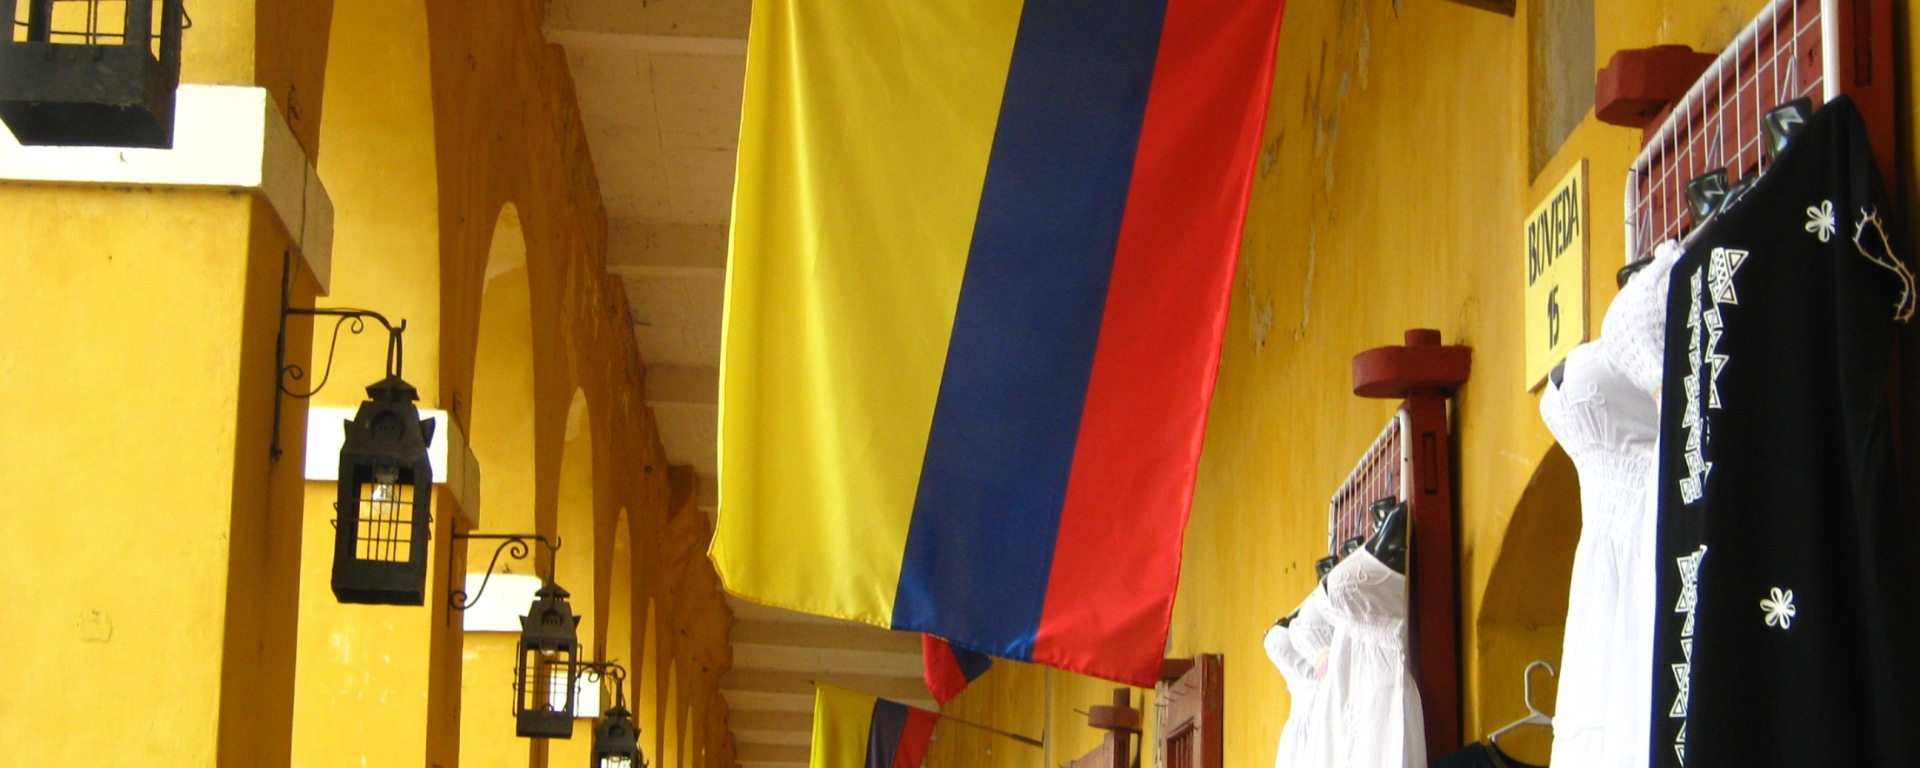 Flag in Cartagena Colombia